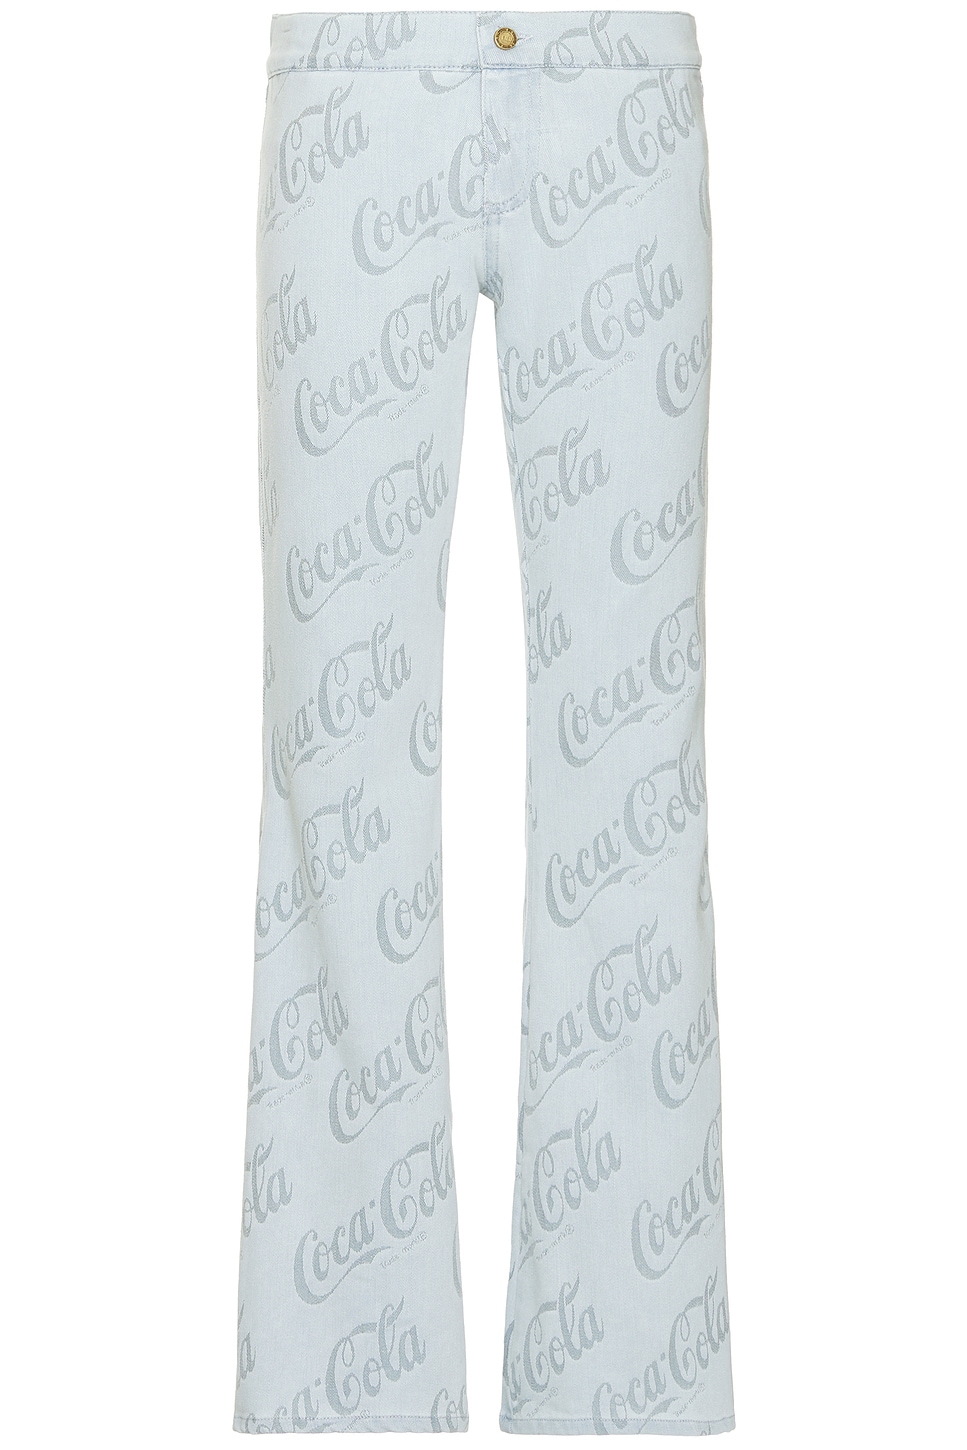 Image 1 of ERL Jacquard Denim Flare Pants Woven in Grey Coca Cola